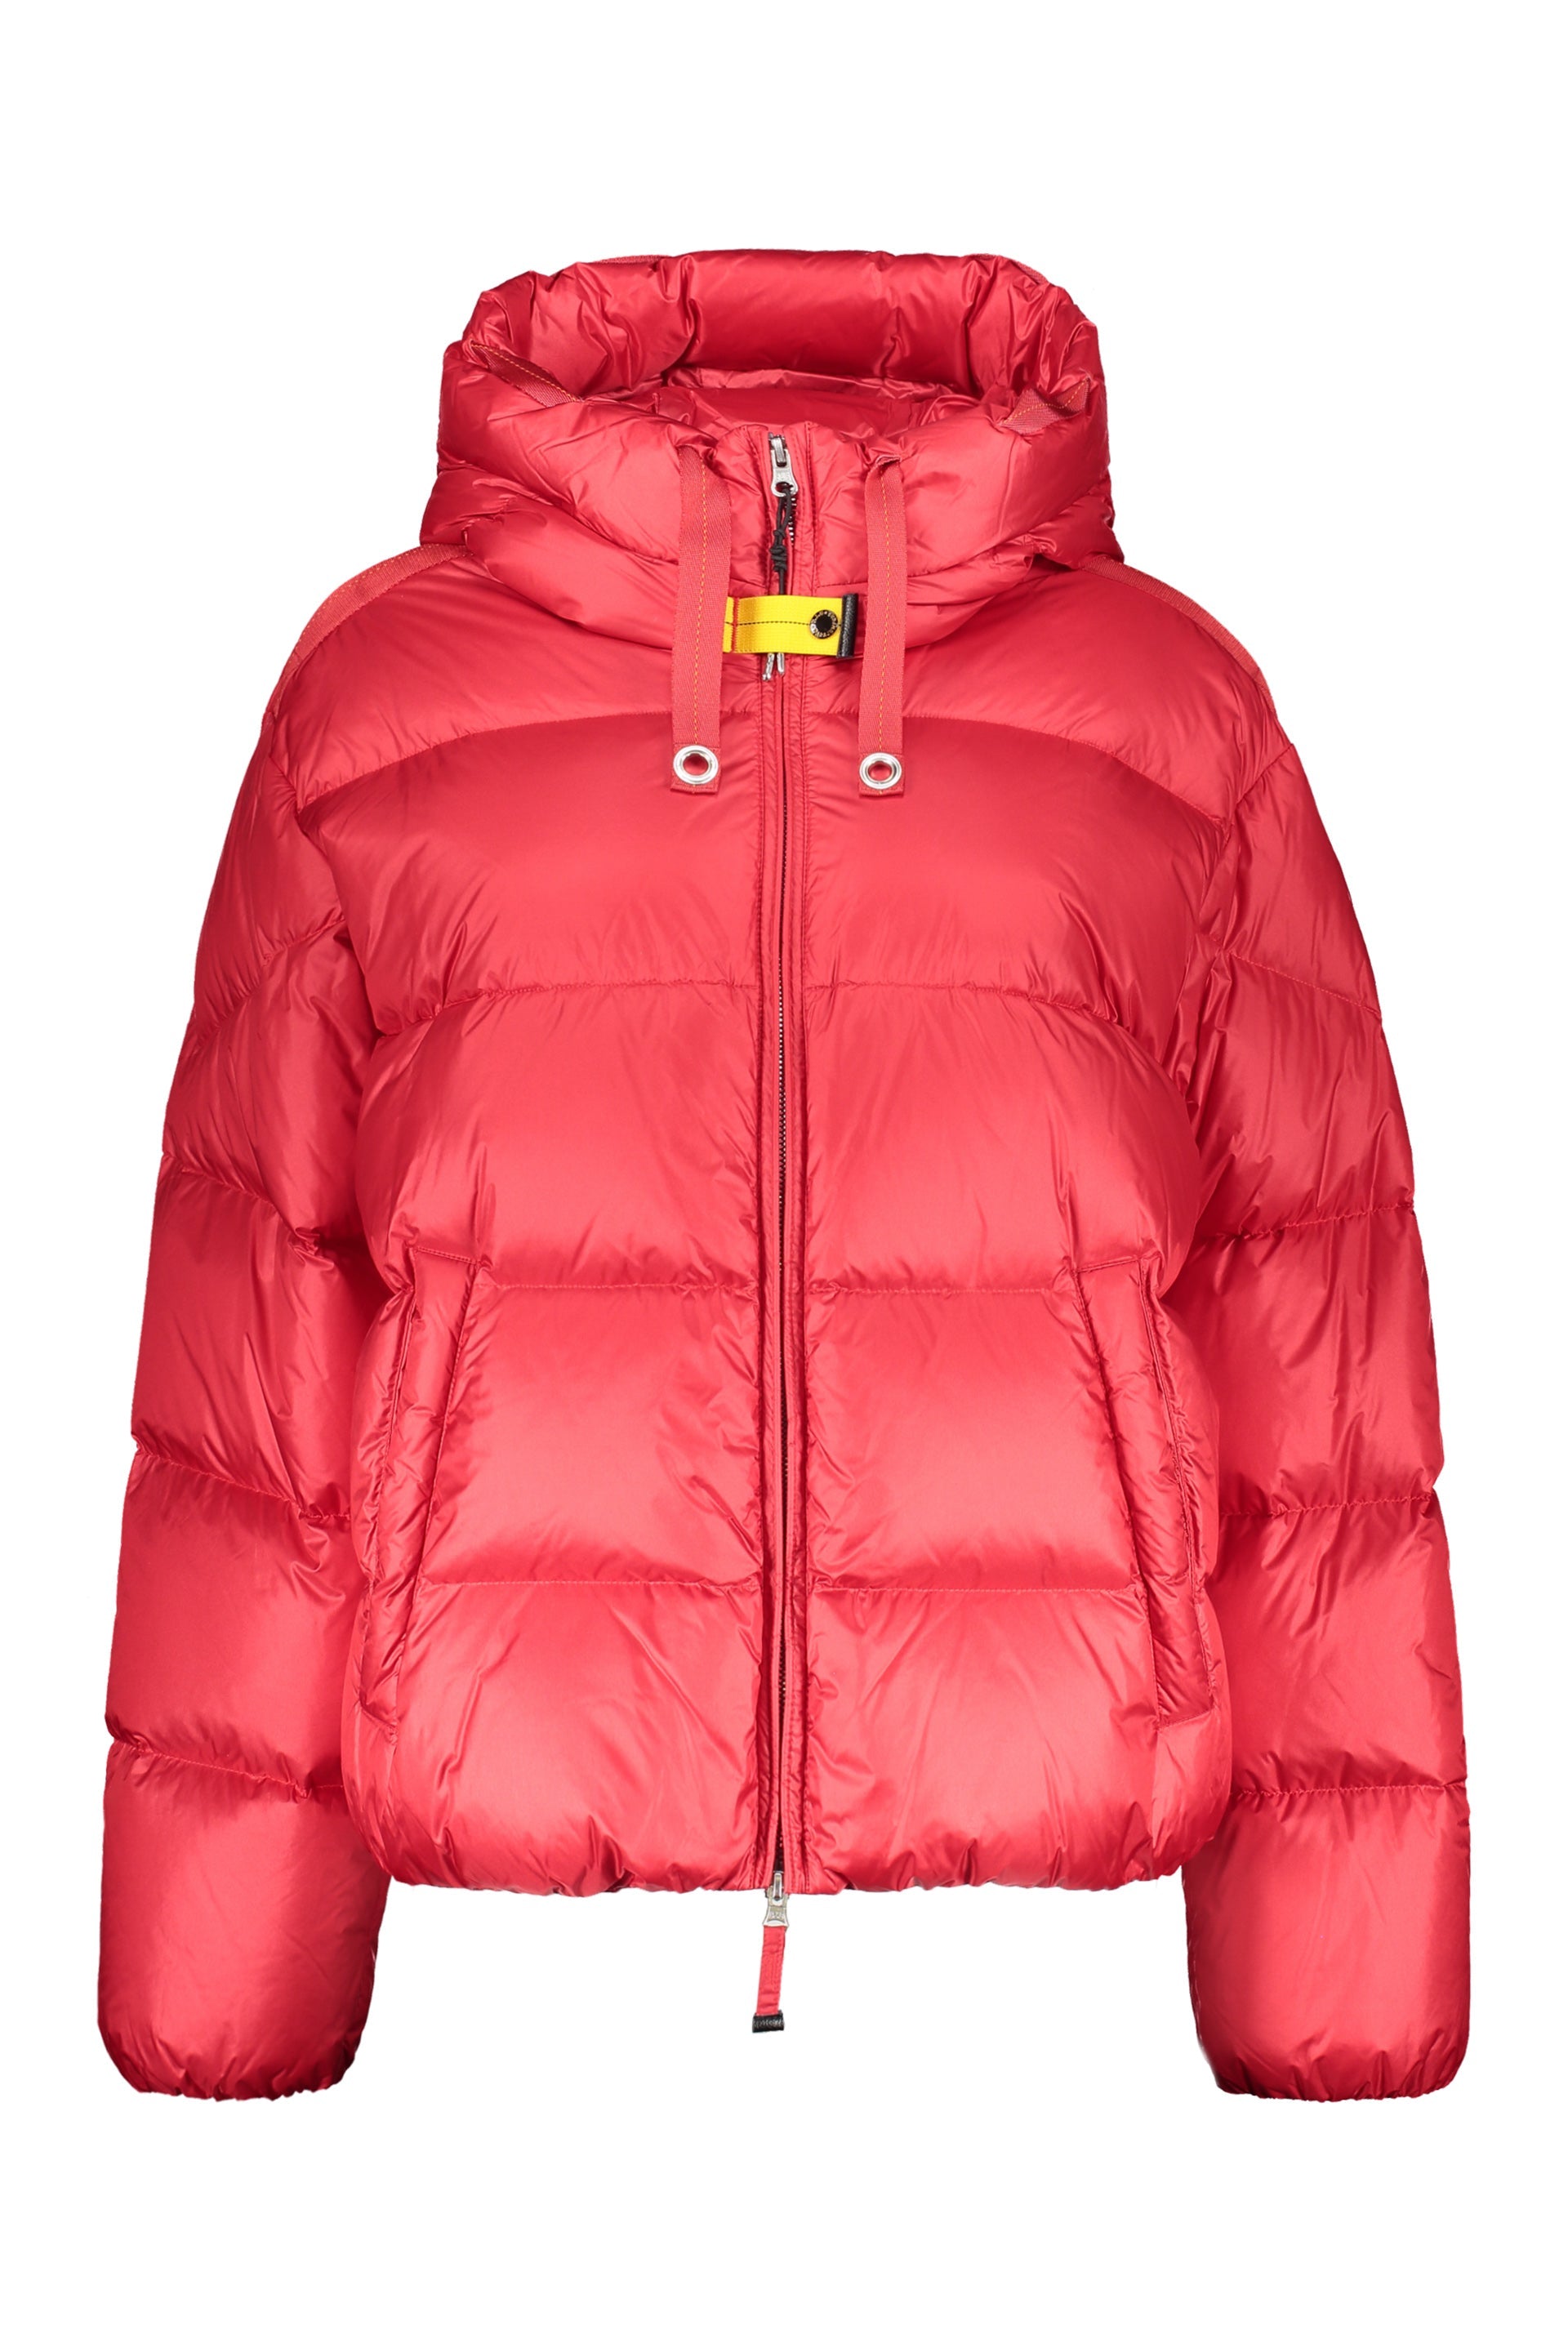 Parajumpers-OUTLET-SALE-Tilly-hooded-short-down-jacket-Jacken-Mantel-L-ARCHIVE-COLLECTION.jpg